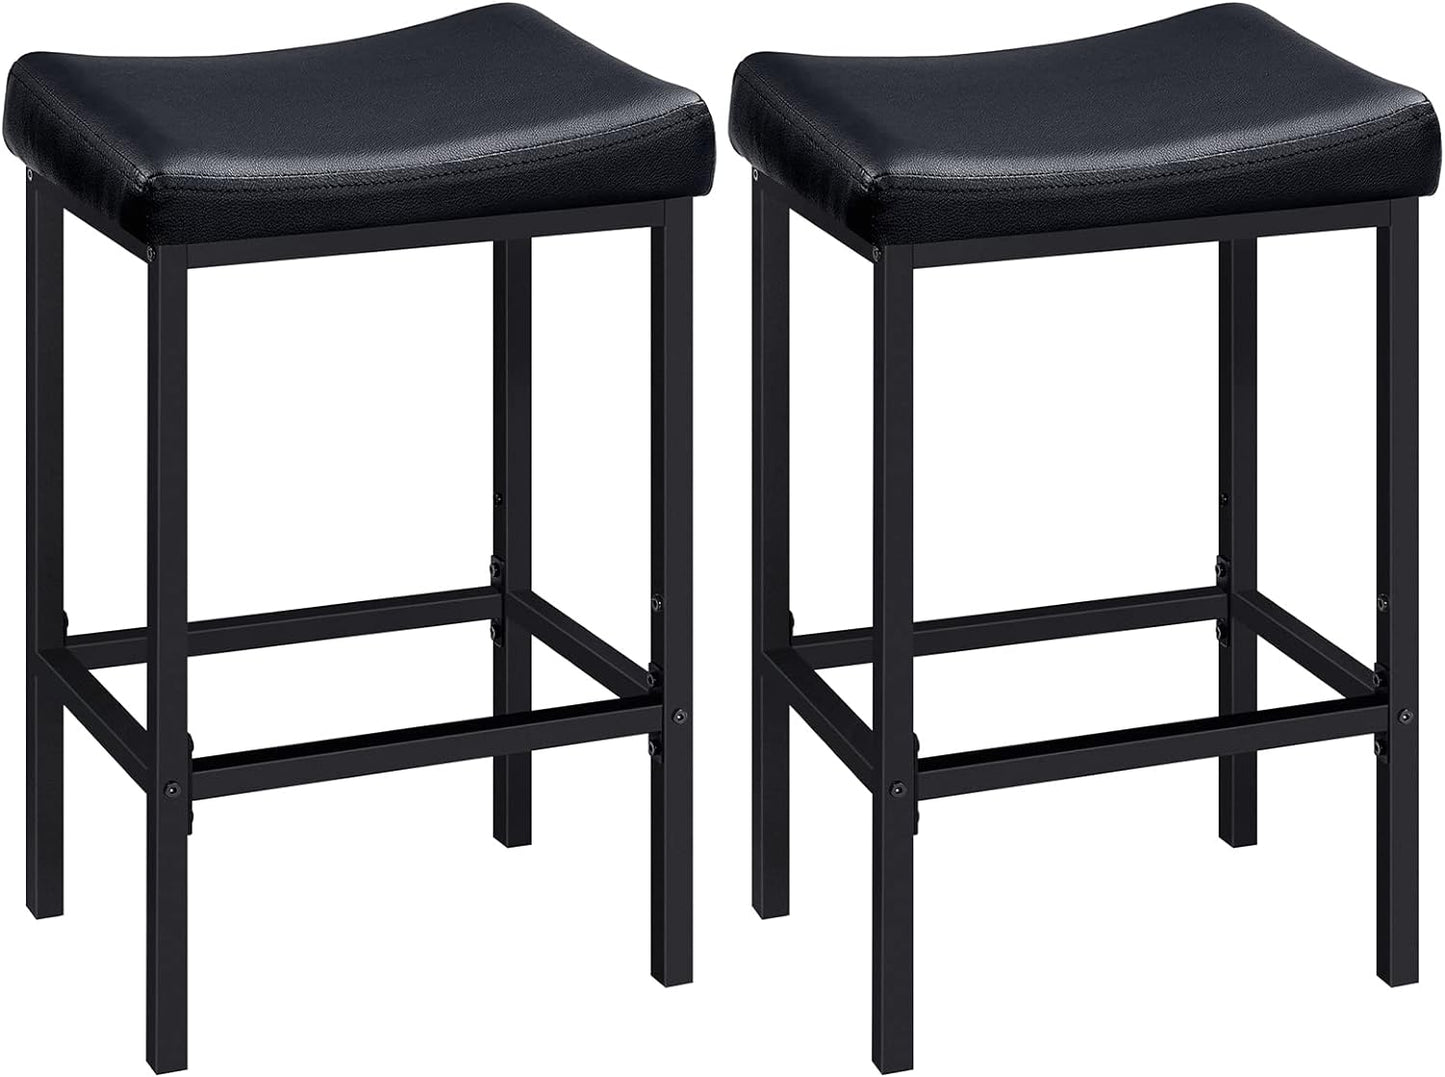 HOOBRO Bar Stools Set of 2, Industrial Kitchen Breakfast Bar Stools, Bar Chairs with Footrest, Counter Height High Stools, for Small Corner Space, Home Pub Garden Bar Table